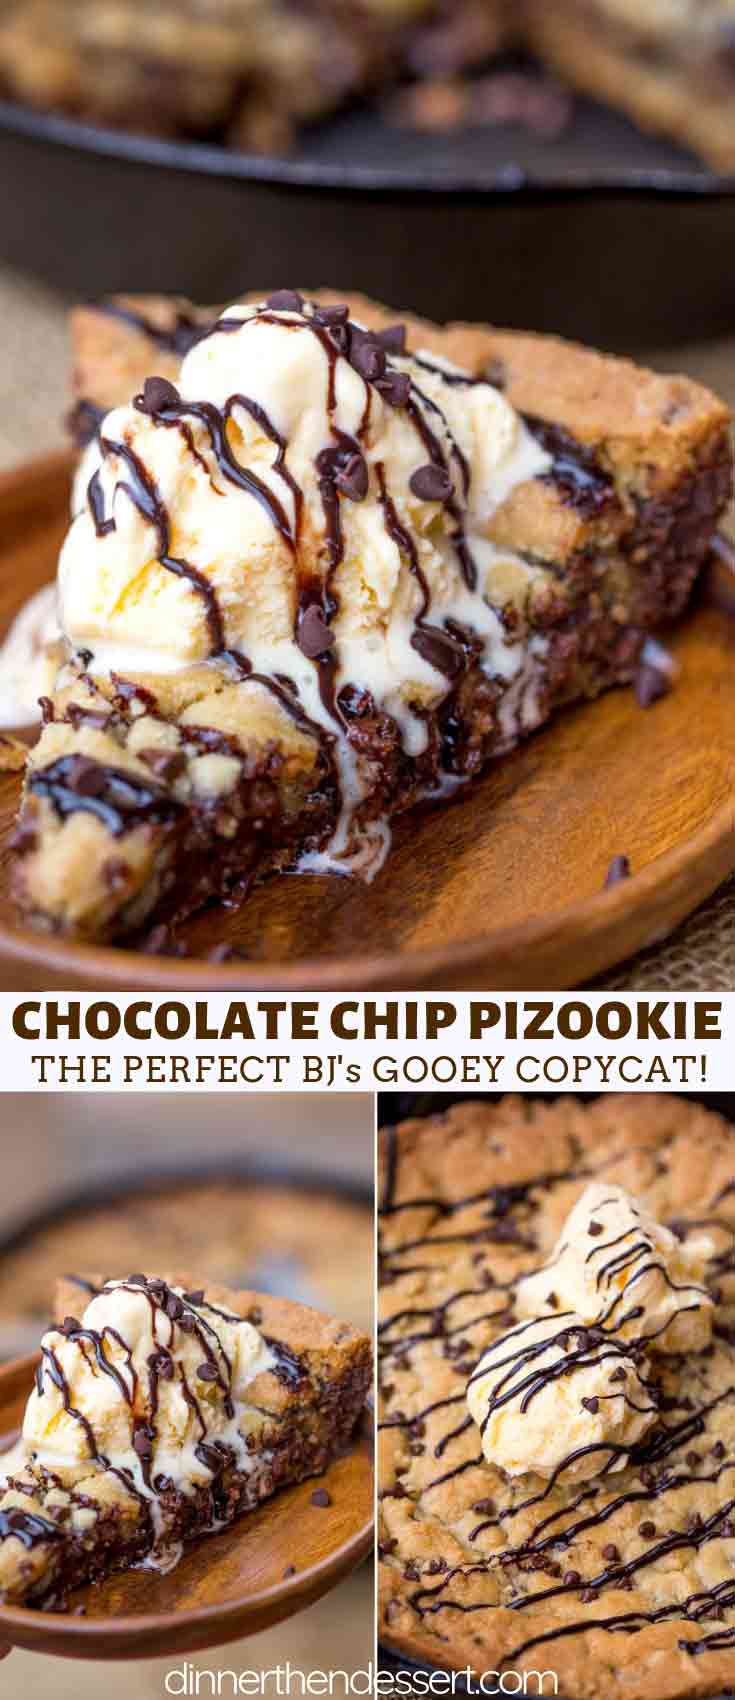 Pictures of Chocolate Chip Pizookie